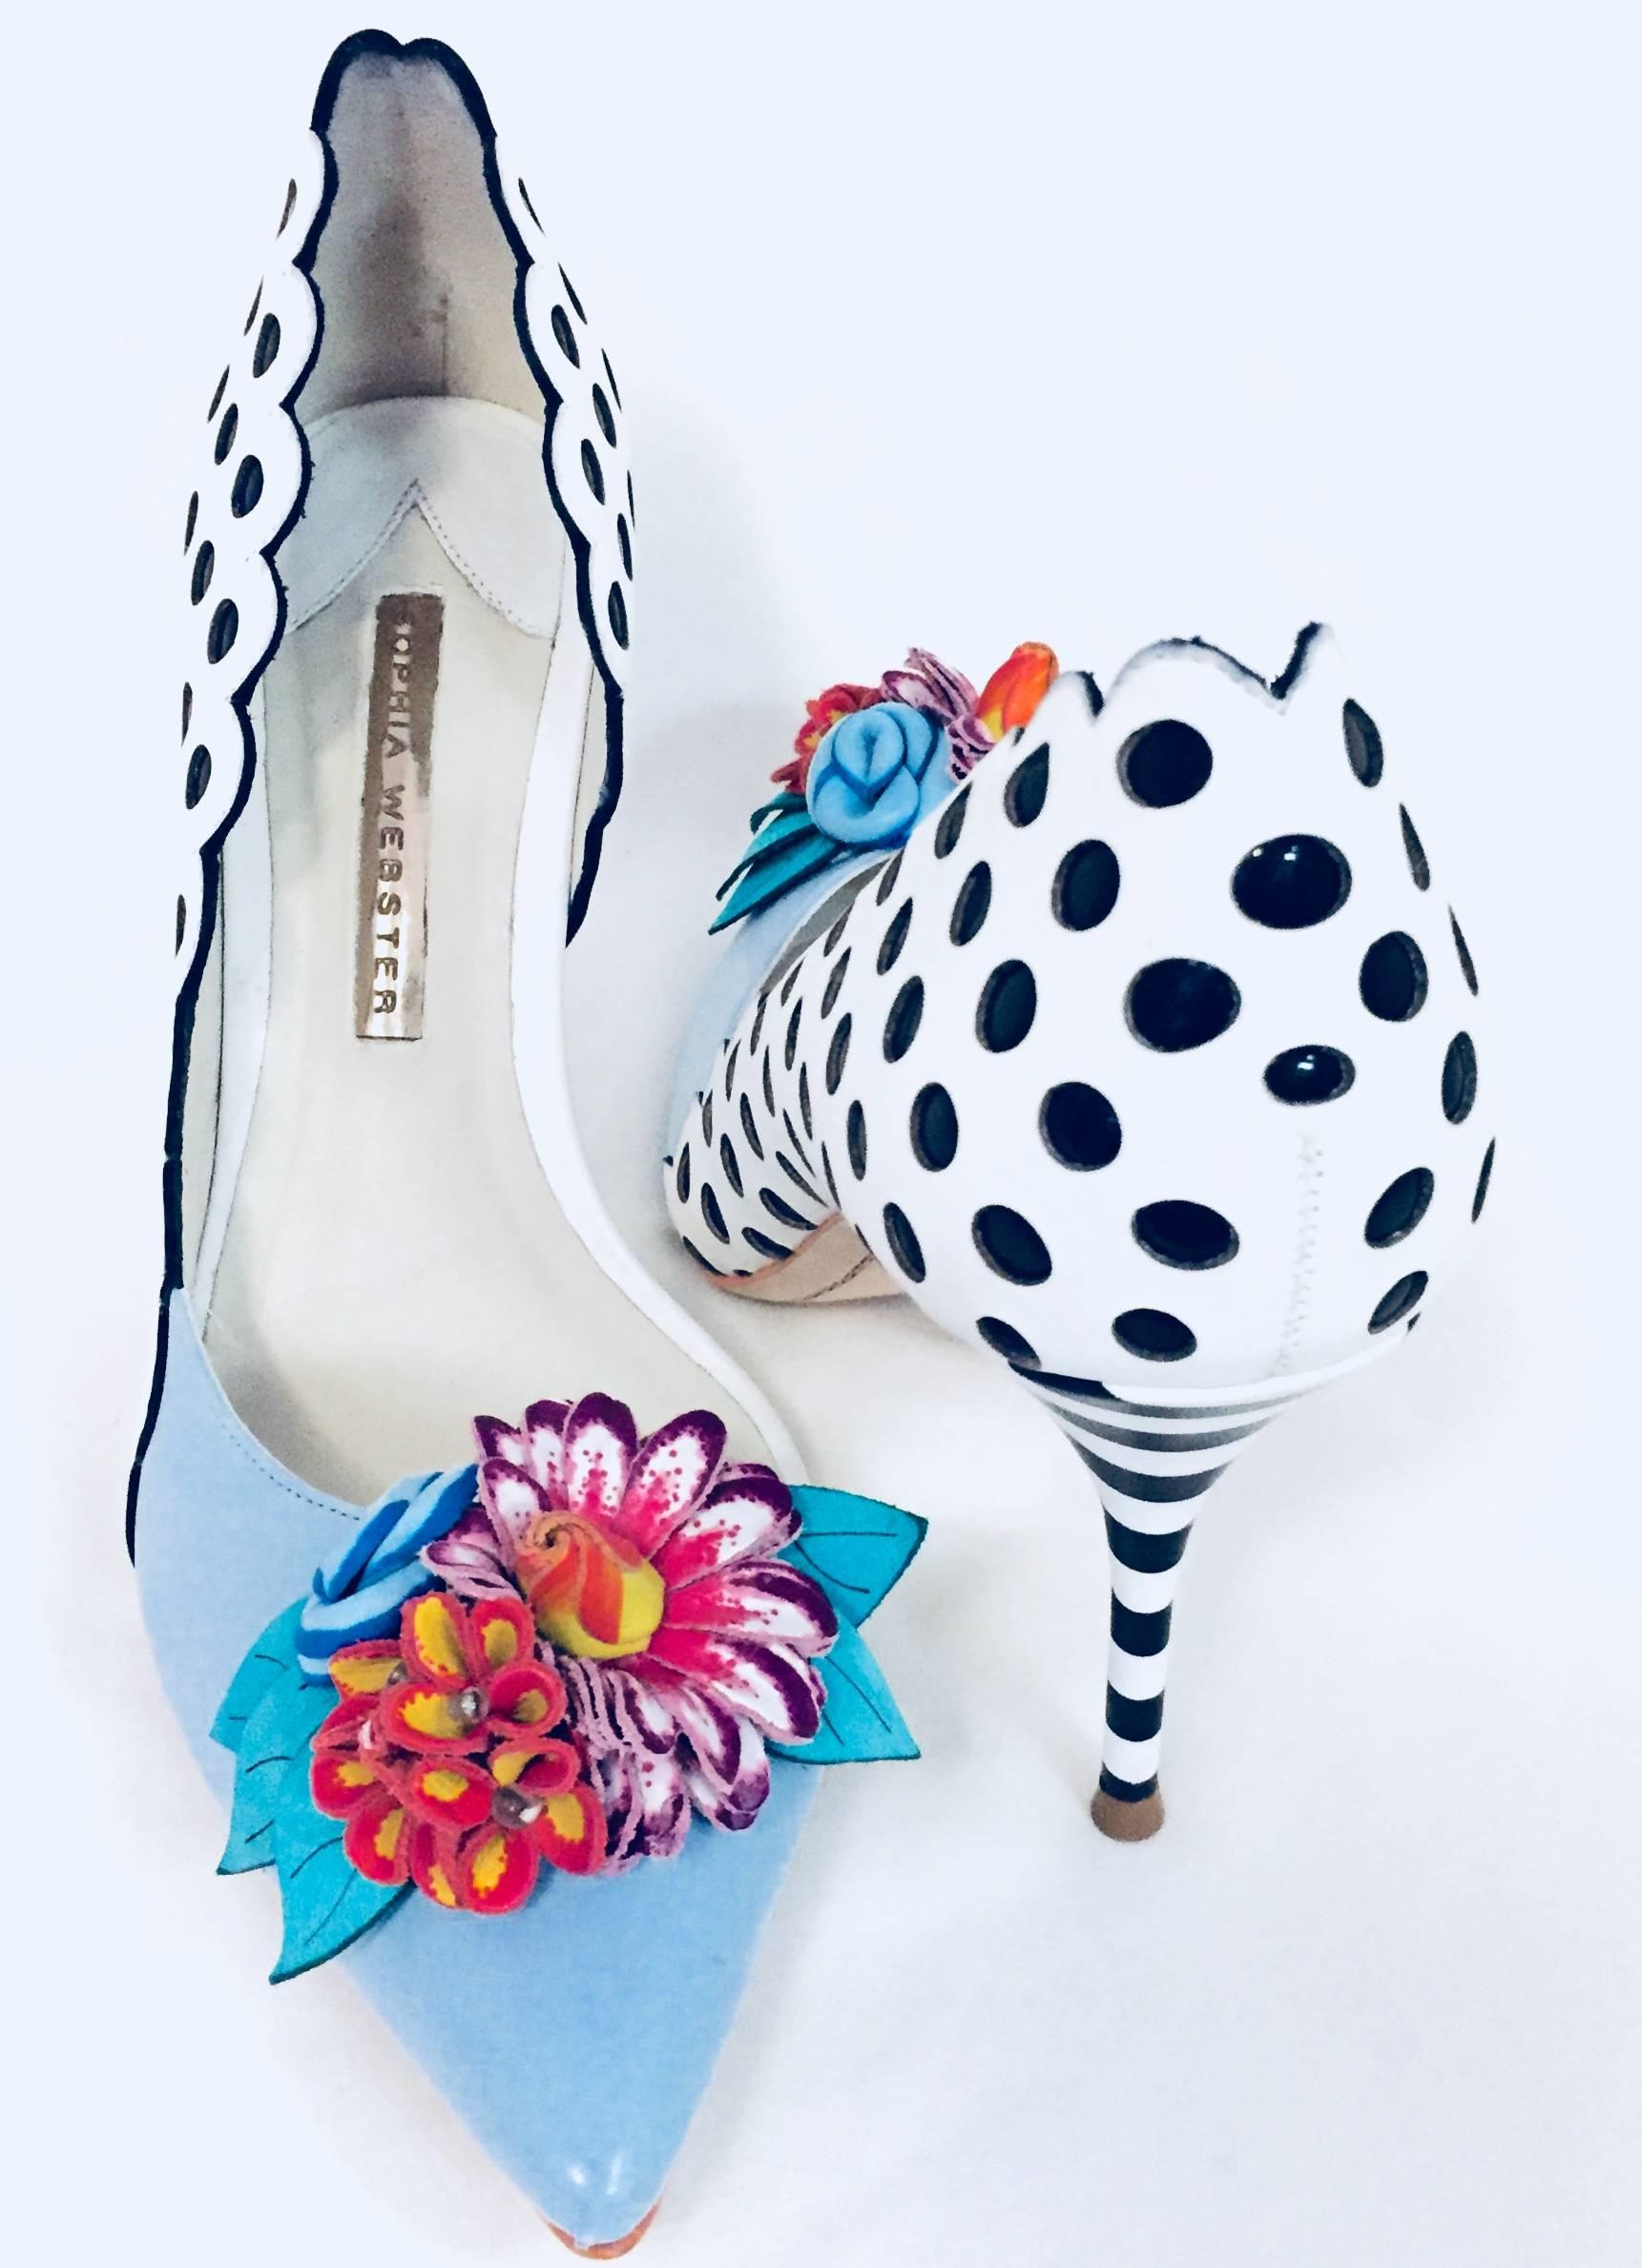 Sophia Webster's black & white polka dots with scalloped edges Dorsay pumps are fun and creative.  The Lilico flower embellished on the pale blue leather pointed toe pumps epitomizes the London based designer's playful aesthetic.  Crafted from white